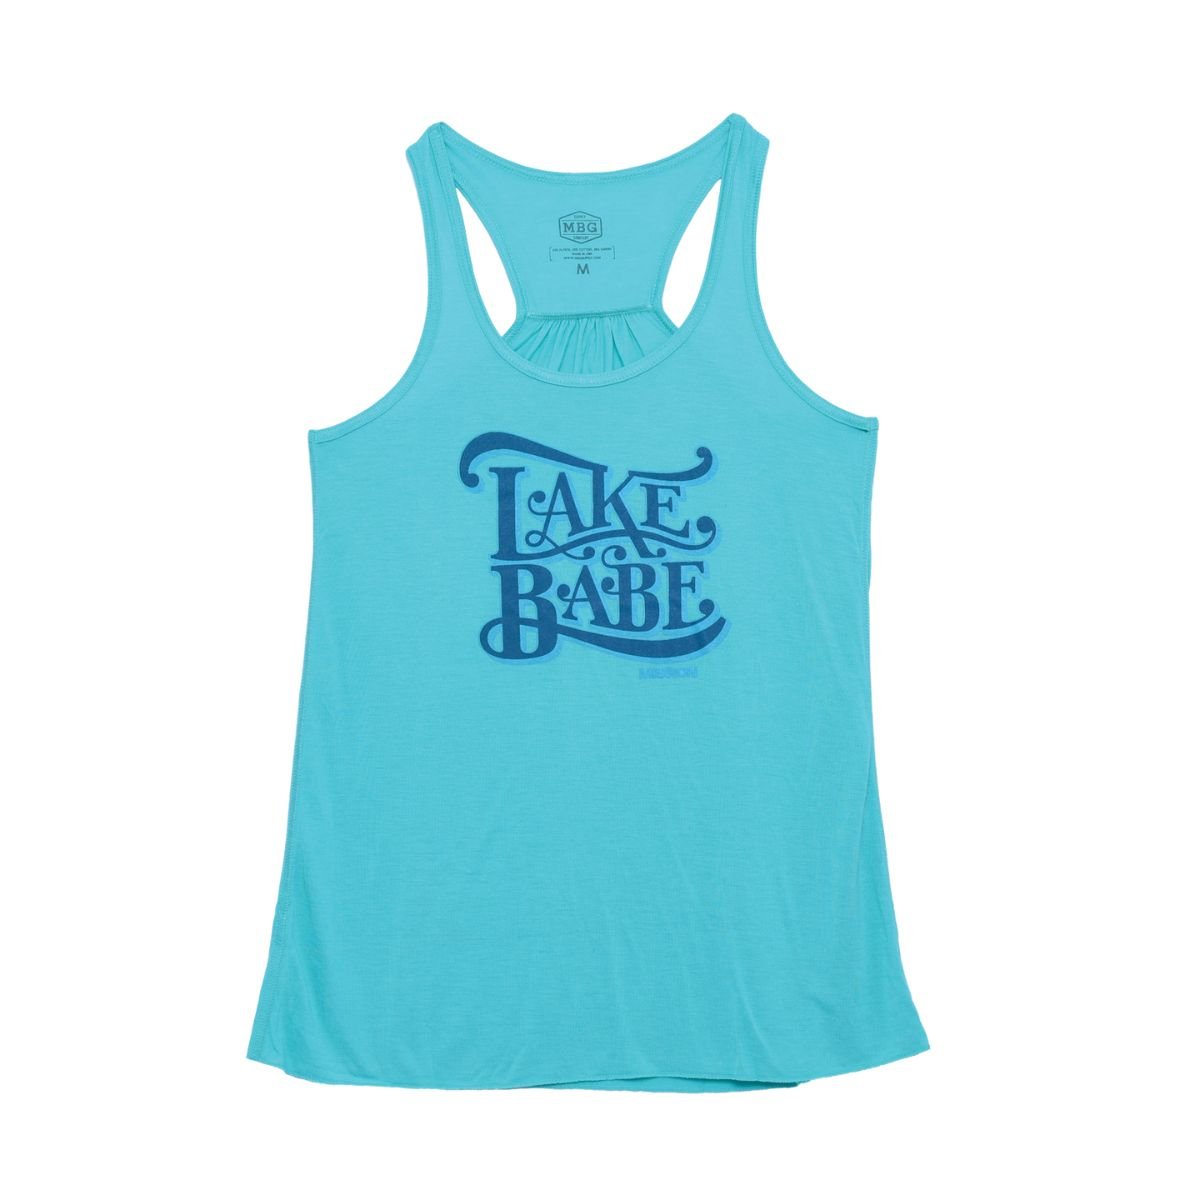 Mission Lake Babe Tank Top in Teal - BoardCo